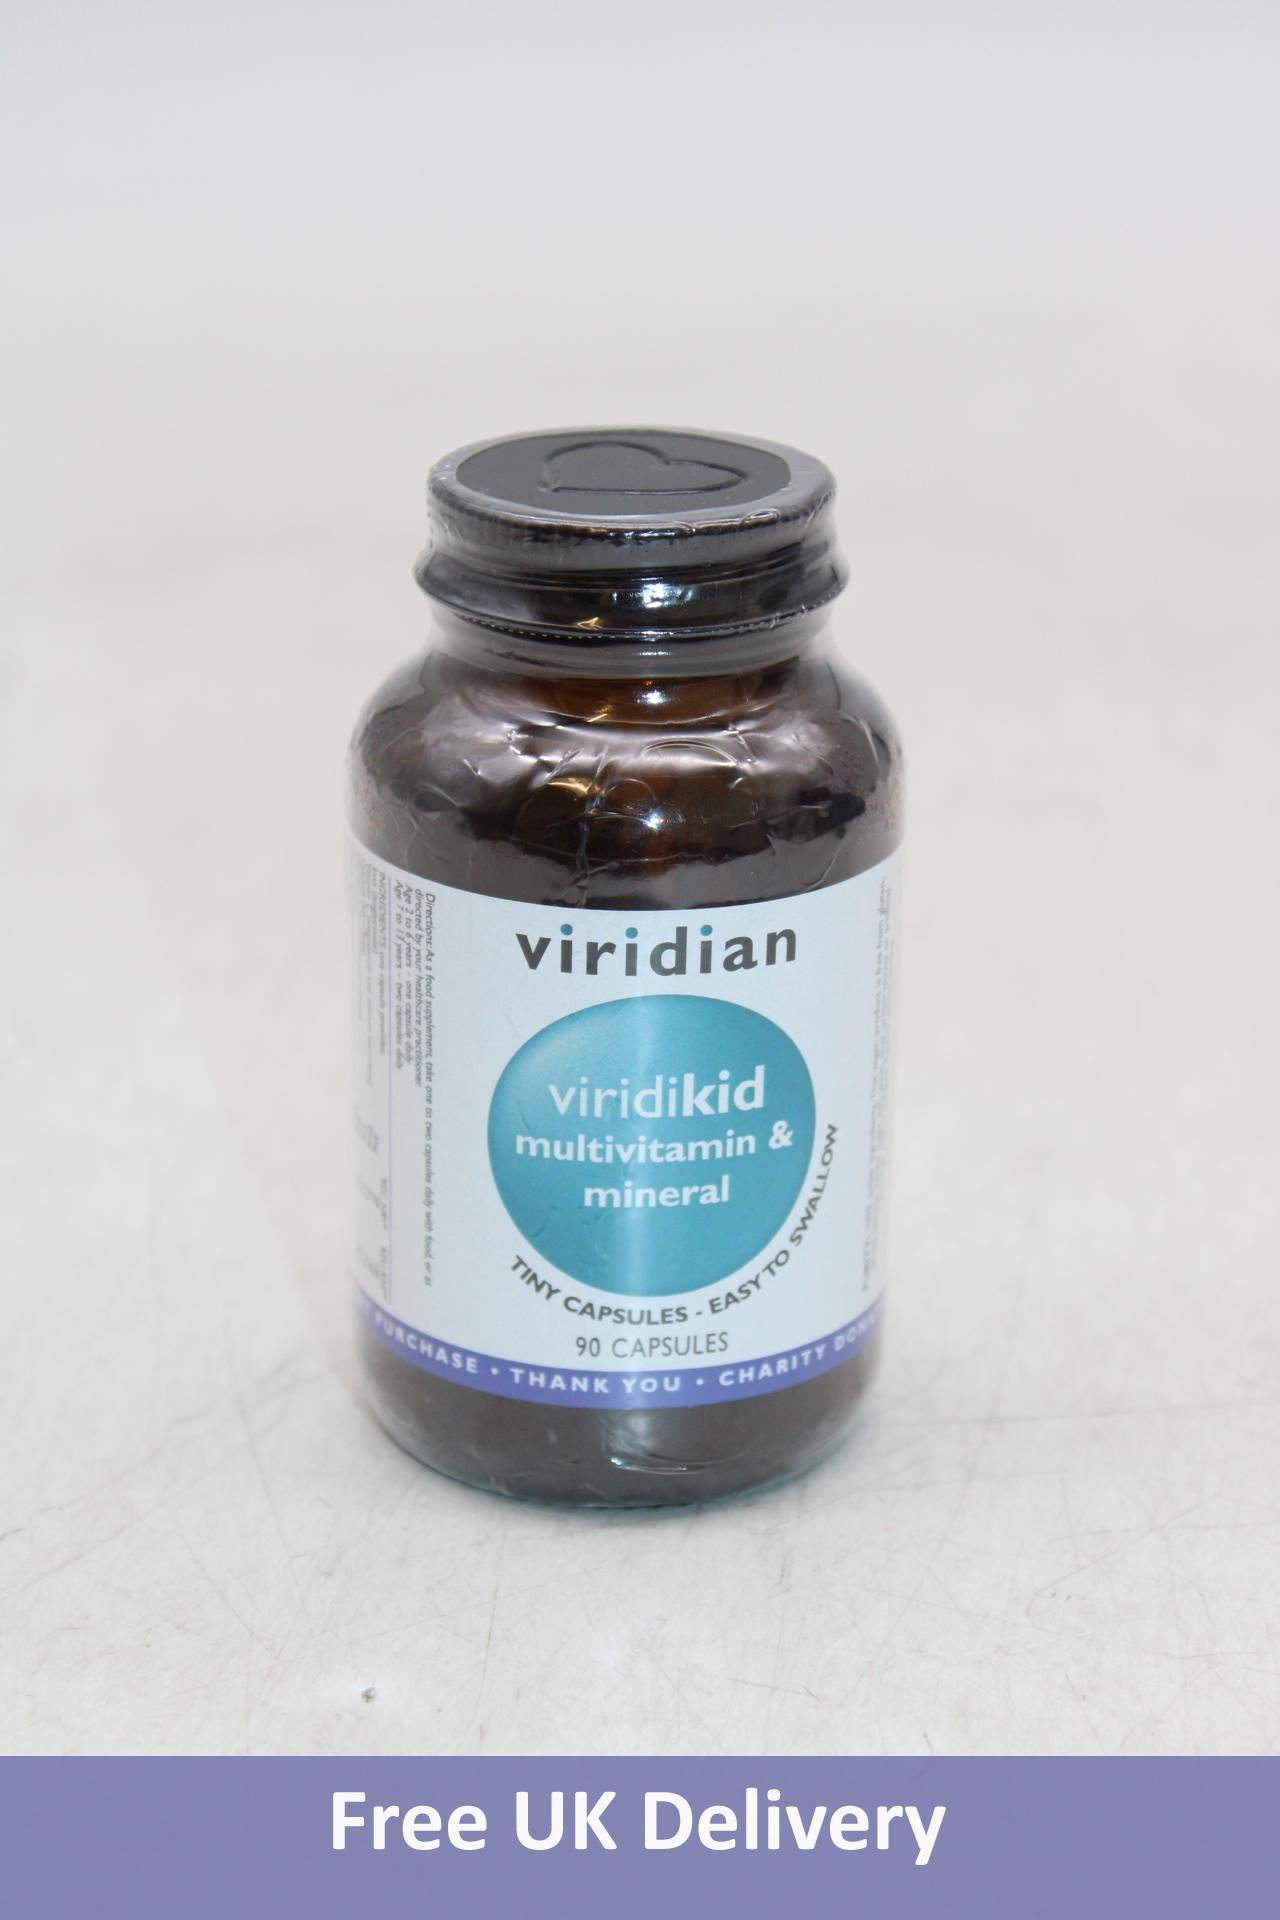 Six Bottles of Viridian kid's Multivitamin & Mineral Food Supplement Tiny Capsules, 90 Capsules Per